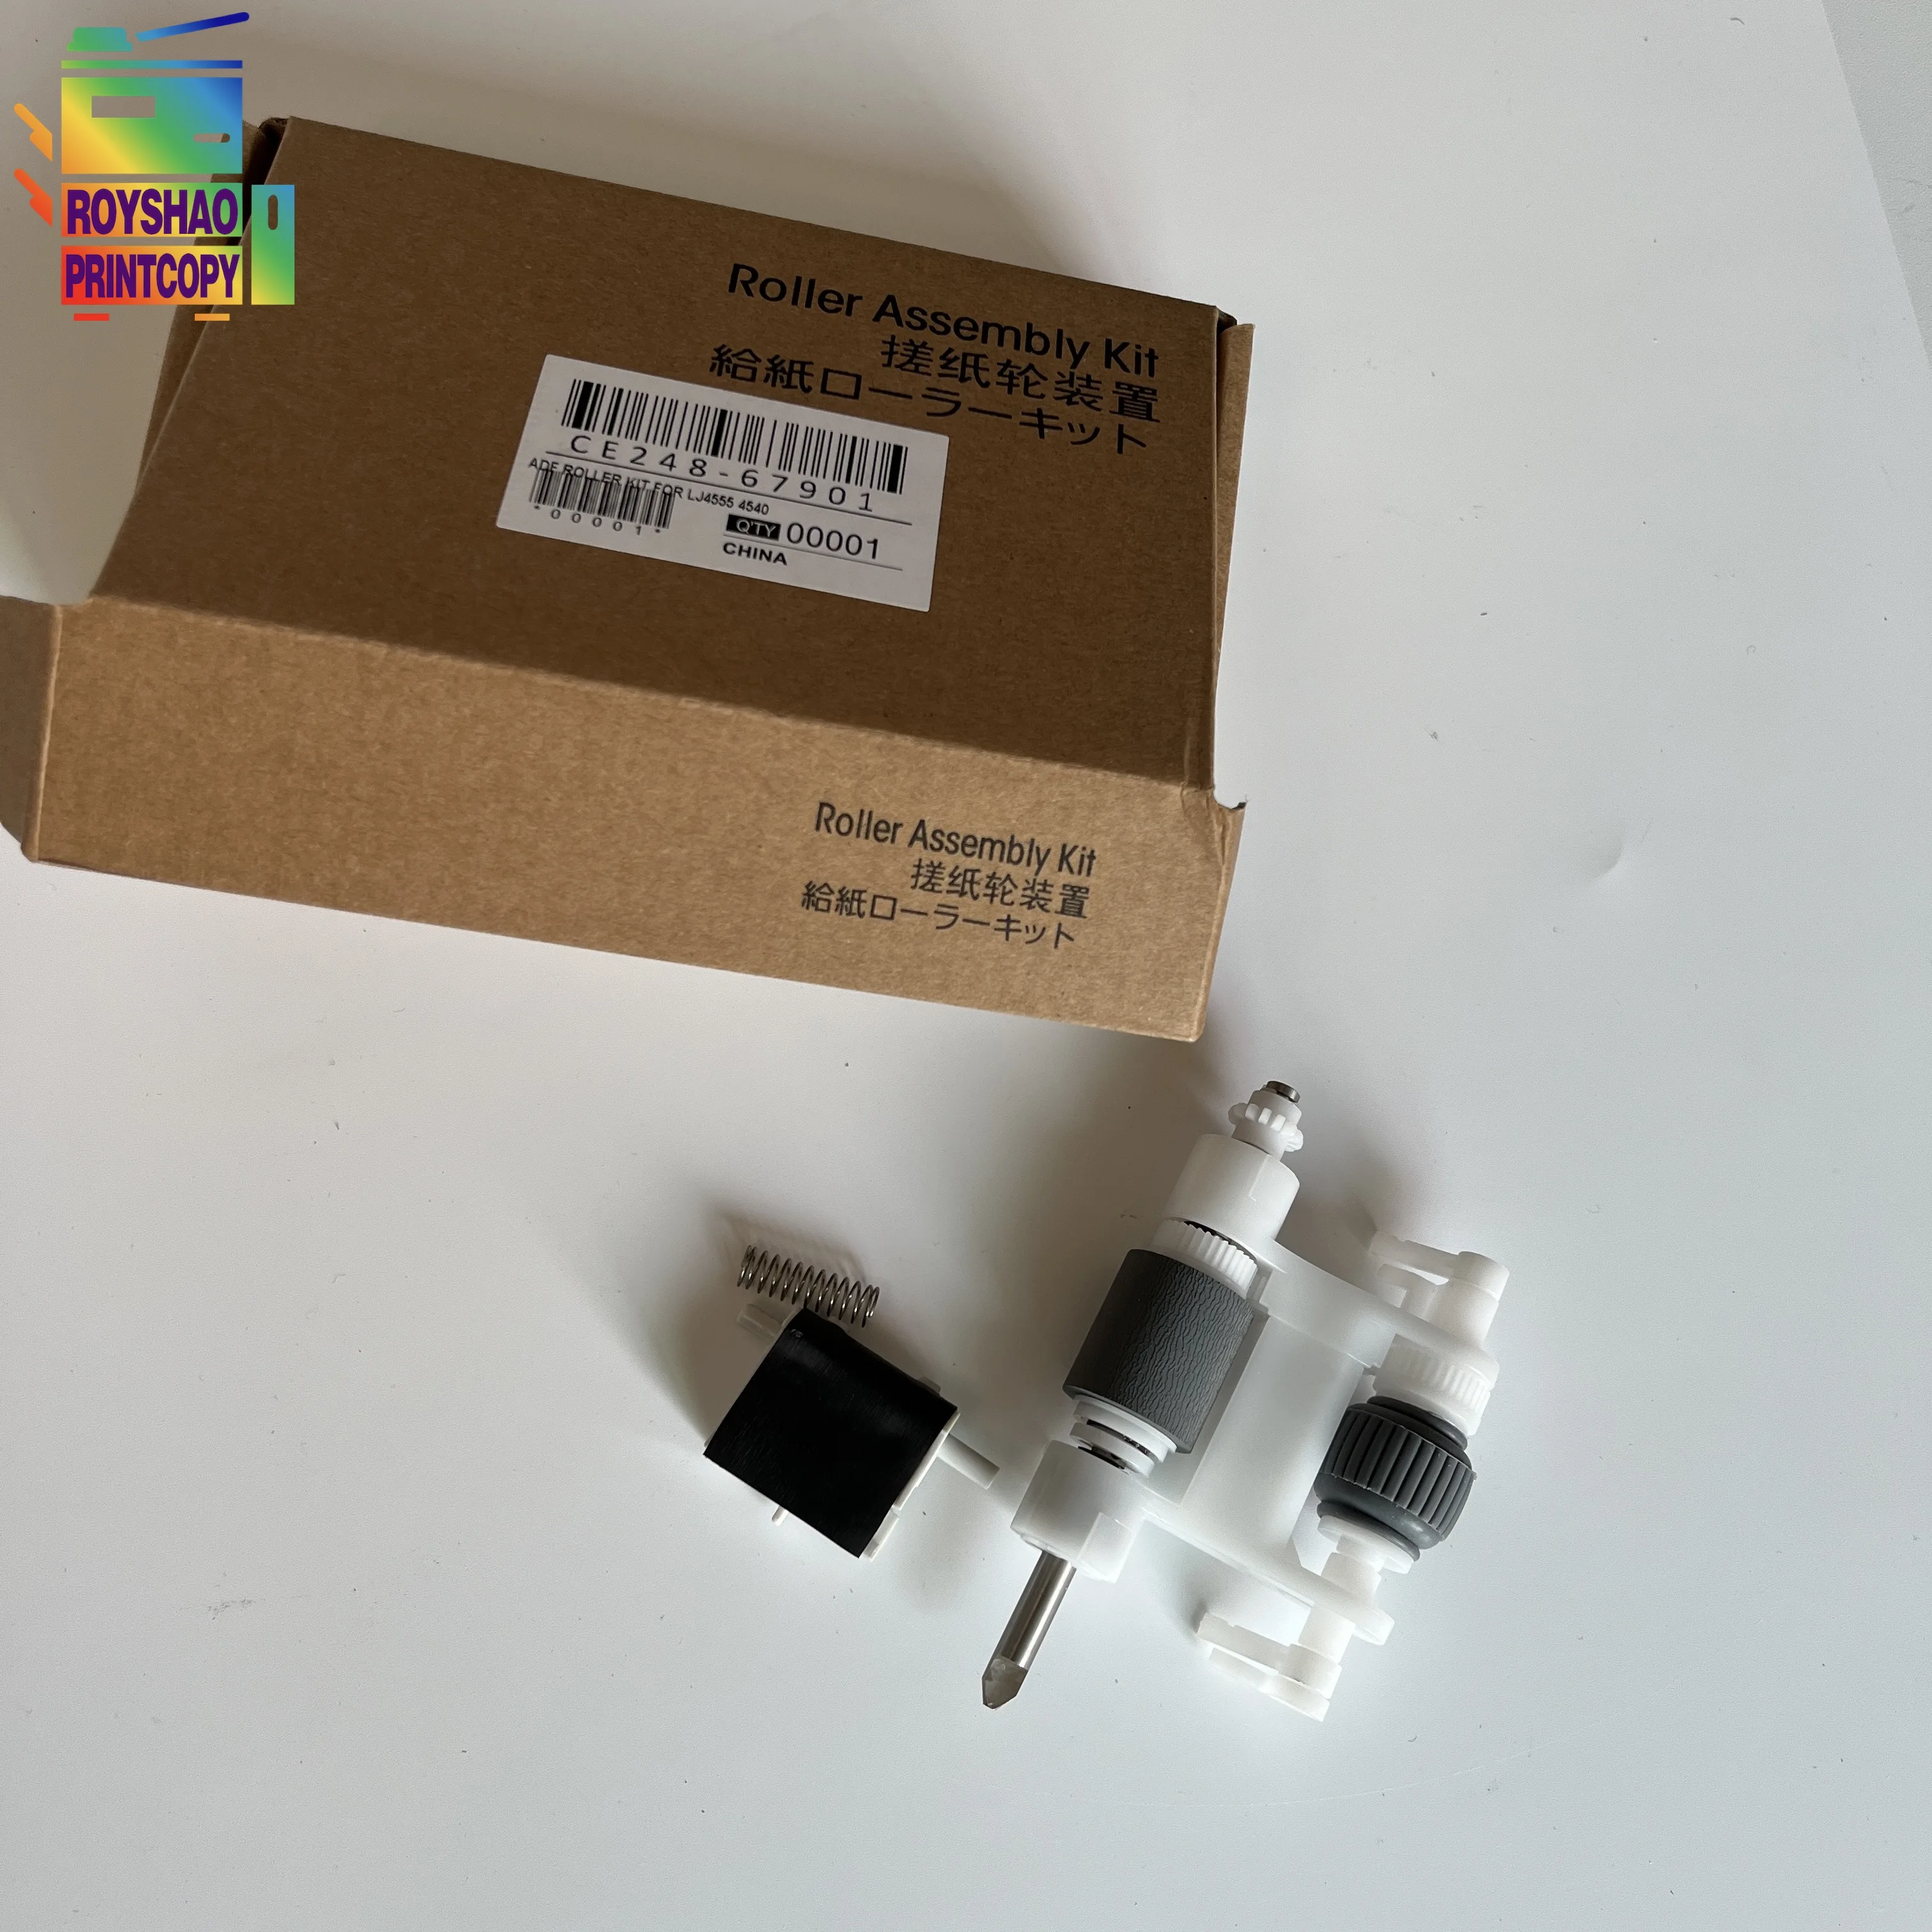 

M4555 Doc Feeder ADF Maintenance Kit Separation Pad + Pickup Roller Assy for HP CM4540 4540 4555 CE248A CE248-67901 PF2309K131NI